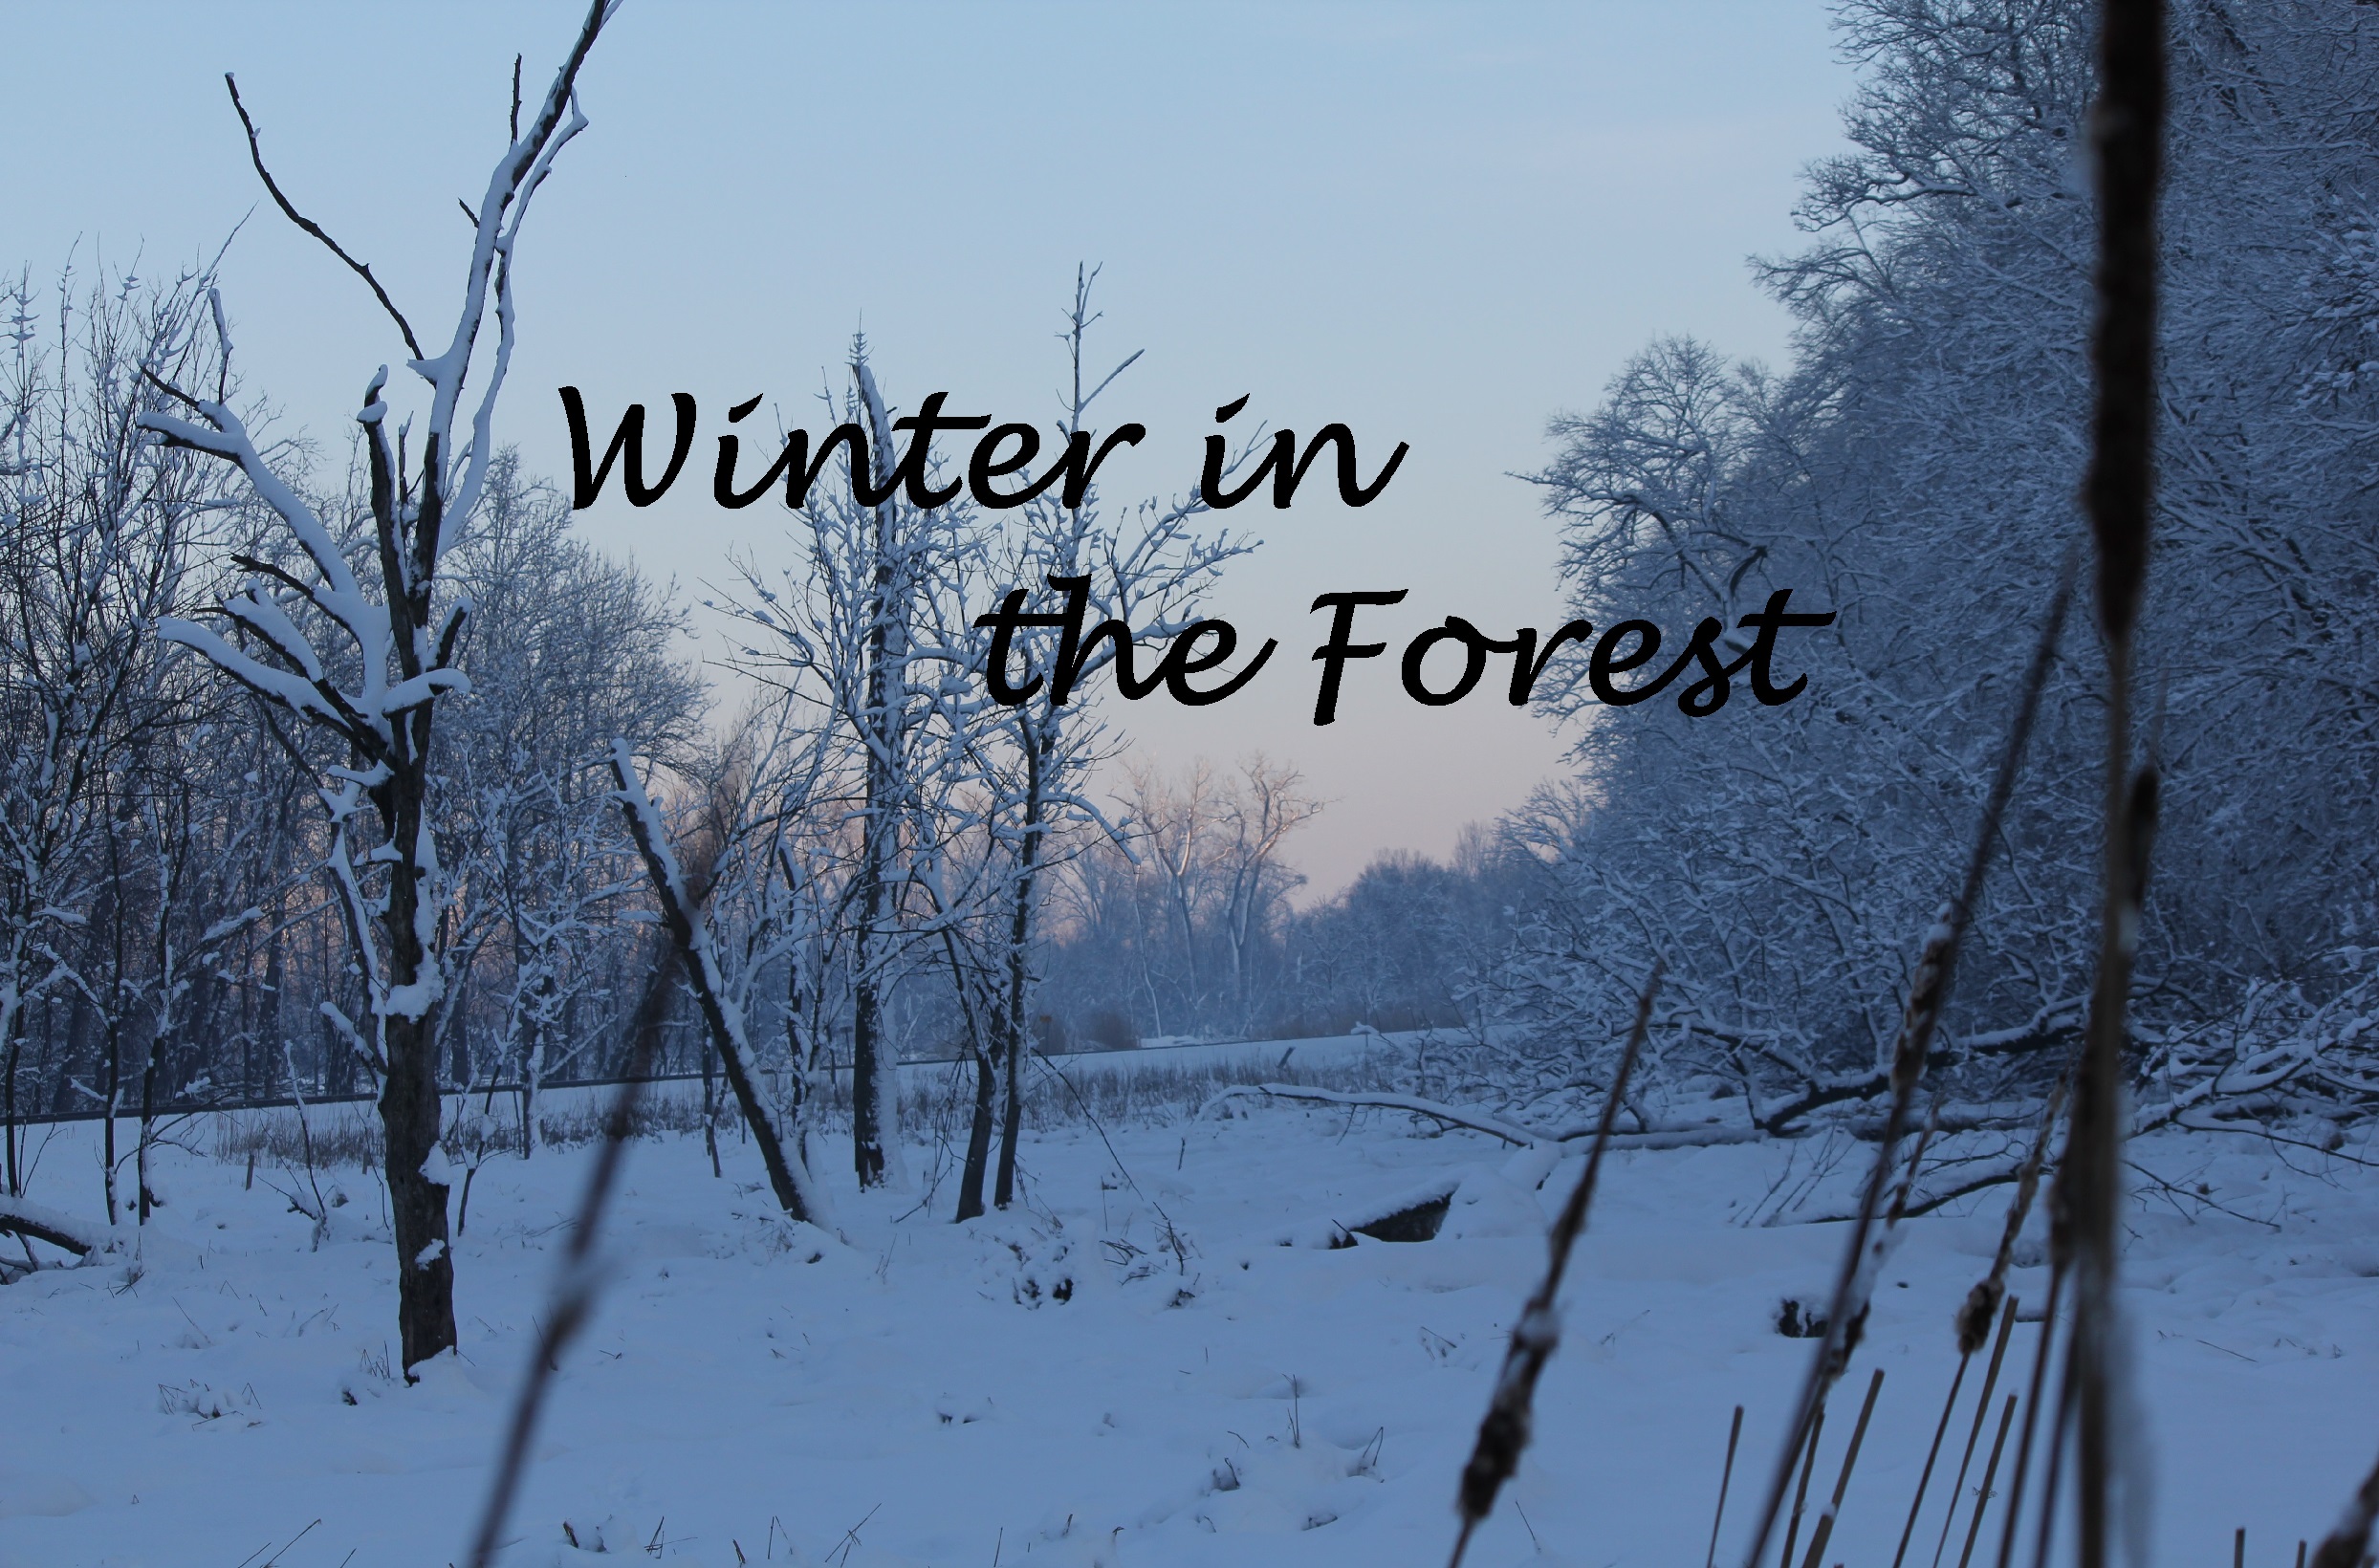 A picture of trees in the winter with the text, "Winter in the Forest".